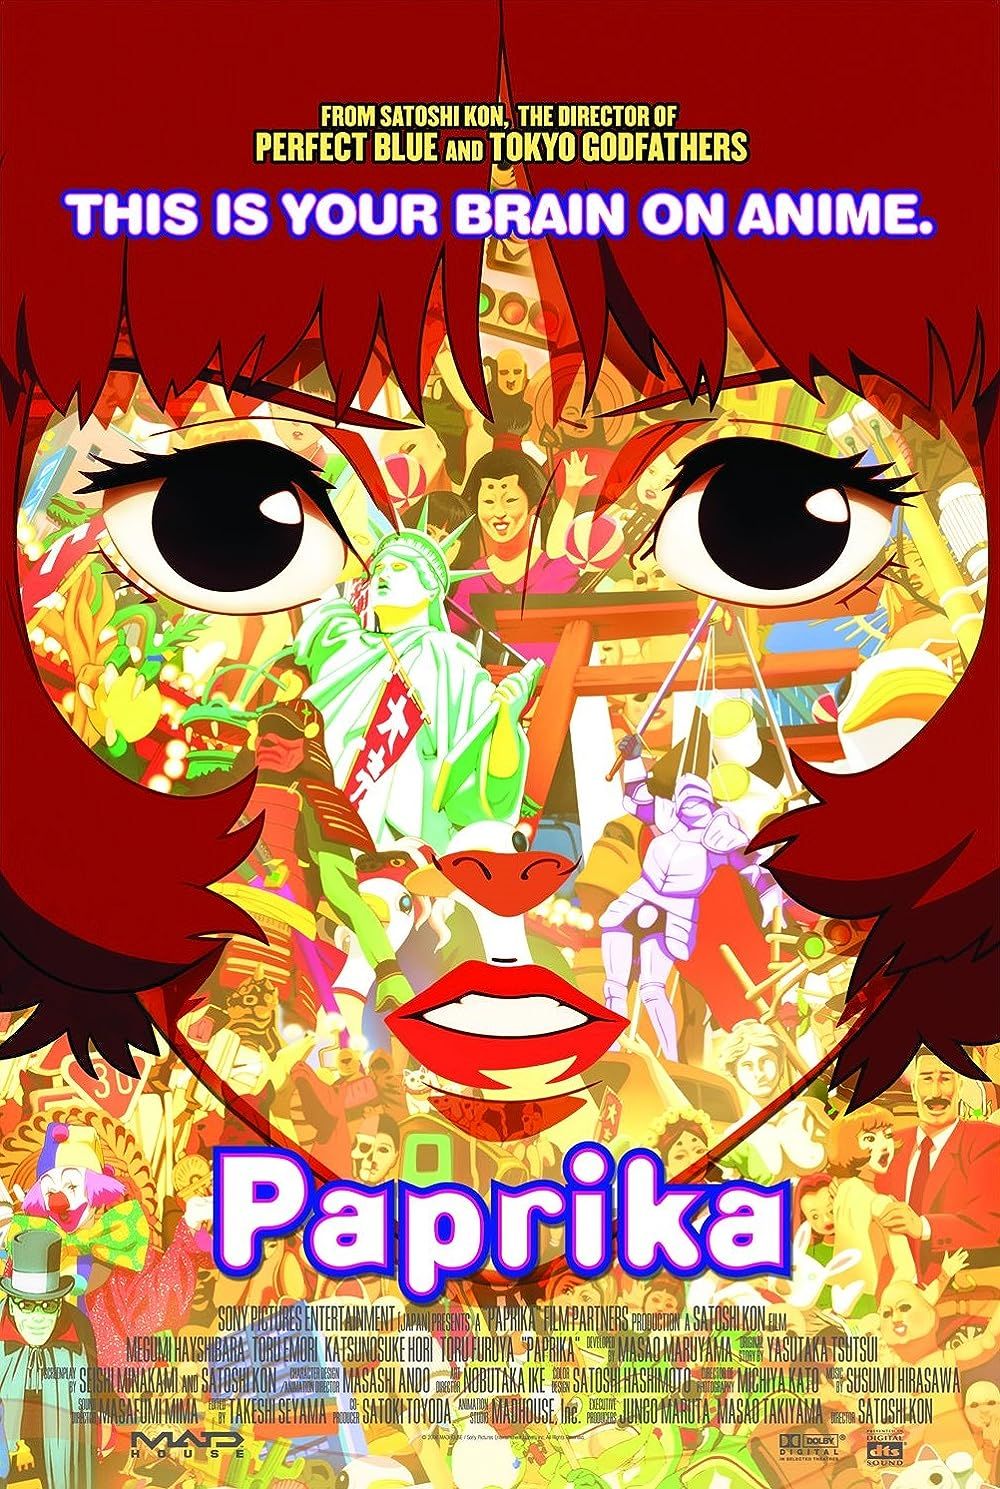 A poster for the anime, paprika